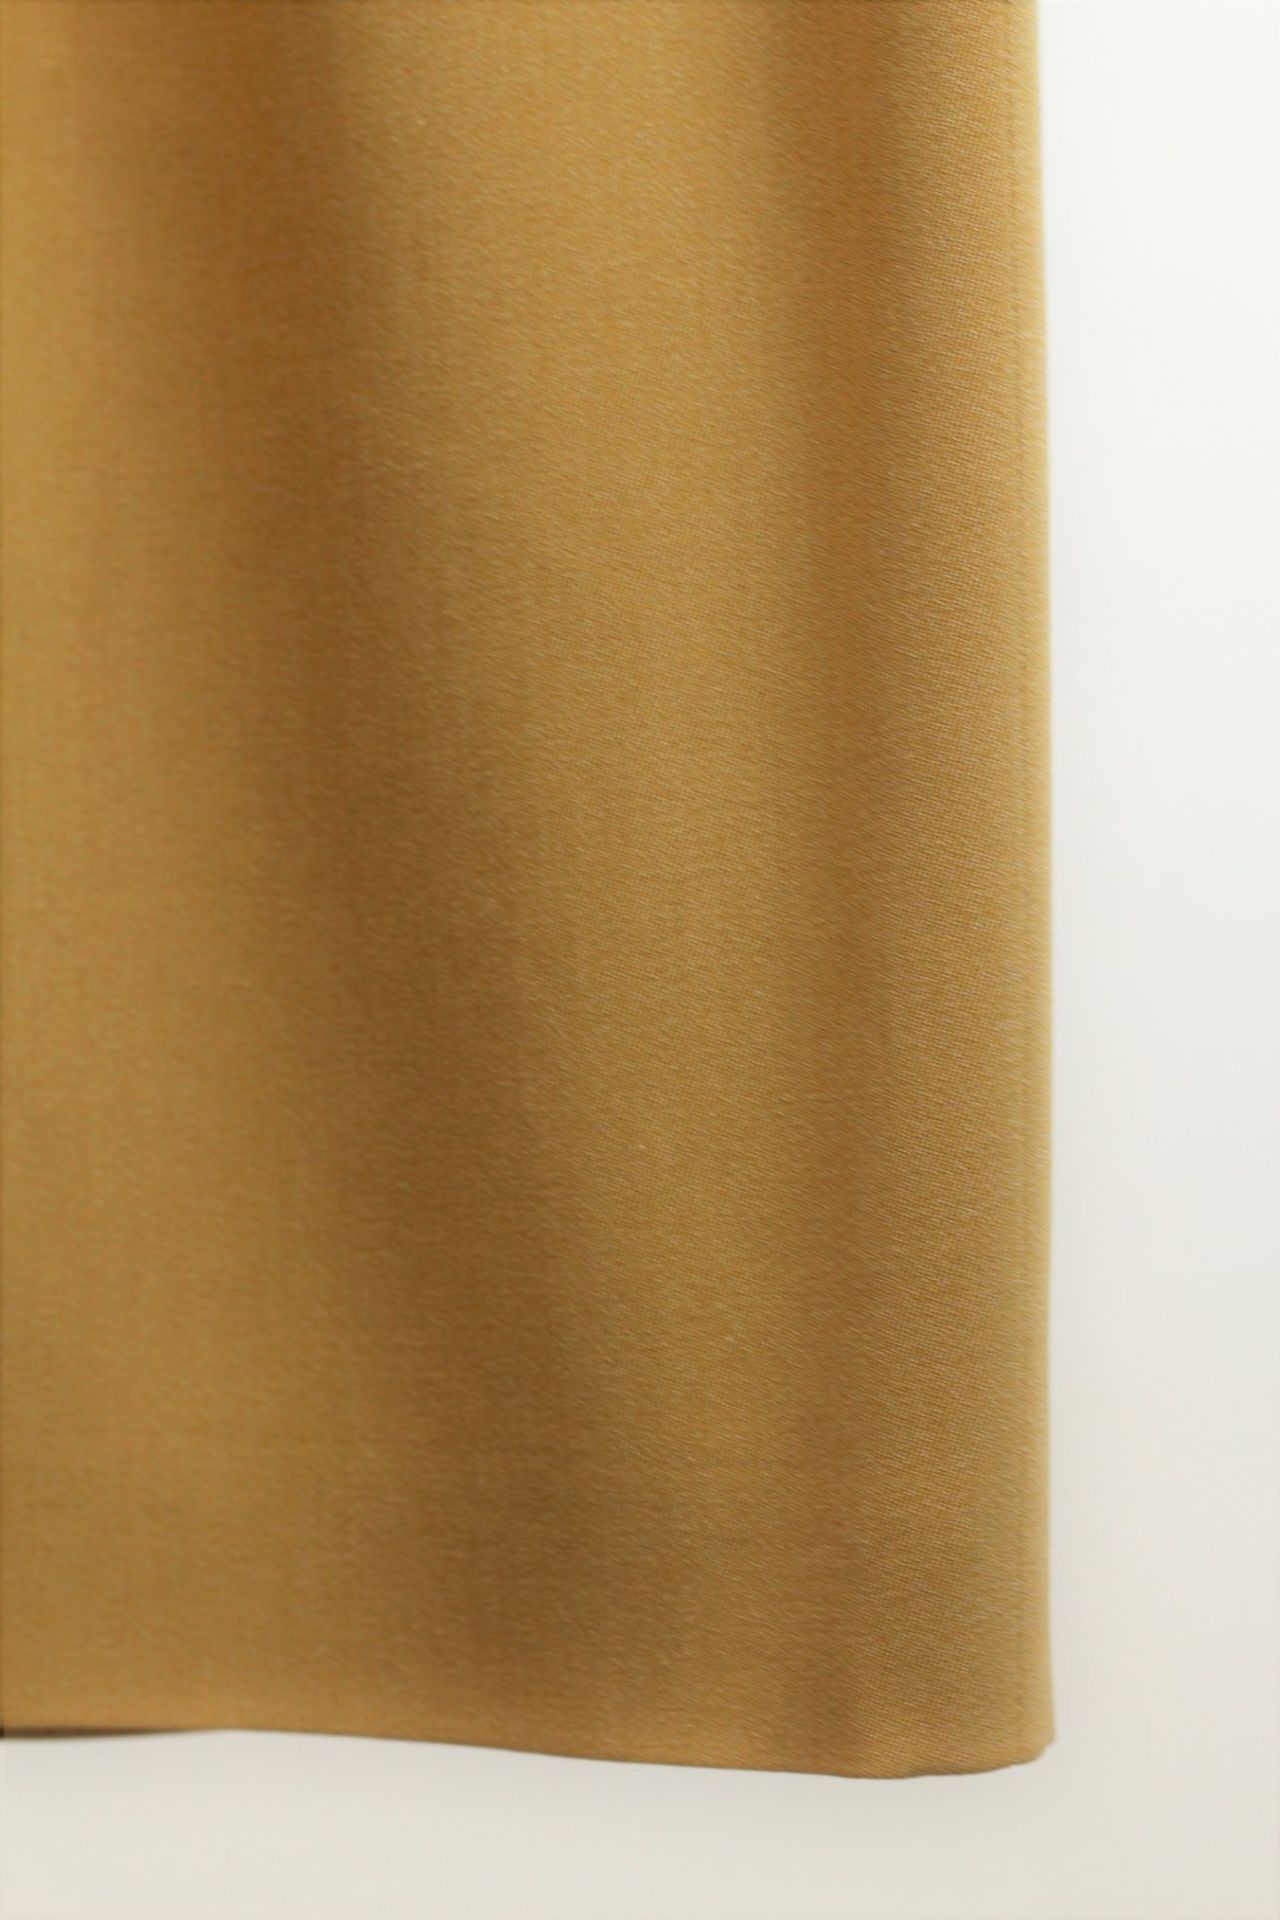 1 x Belvest Mustard Skirt - Size: 18 - Material: 75% Wool 25% Cotton. Lining 100% Rayon - From a - Image 3 of 7